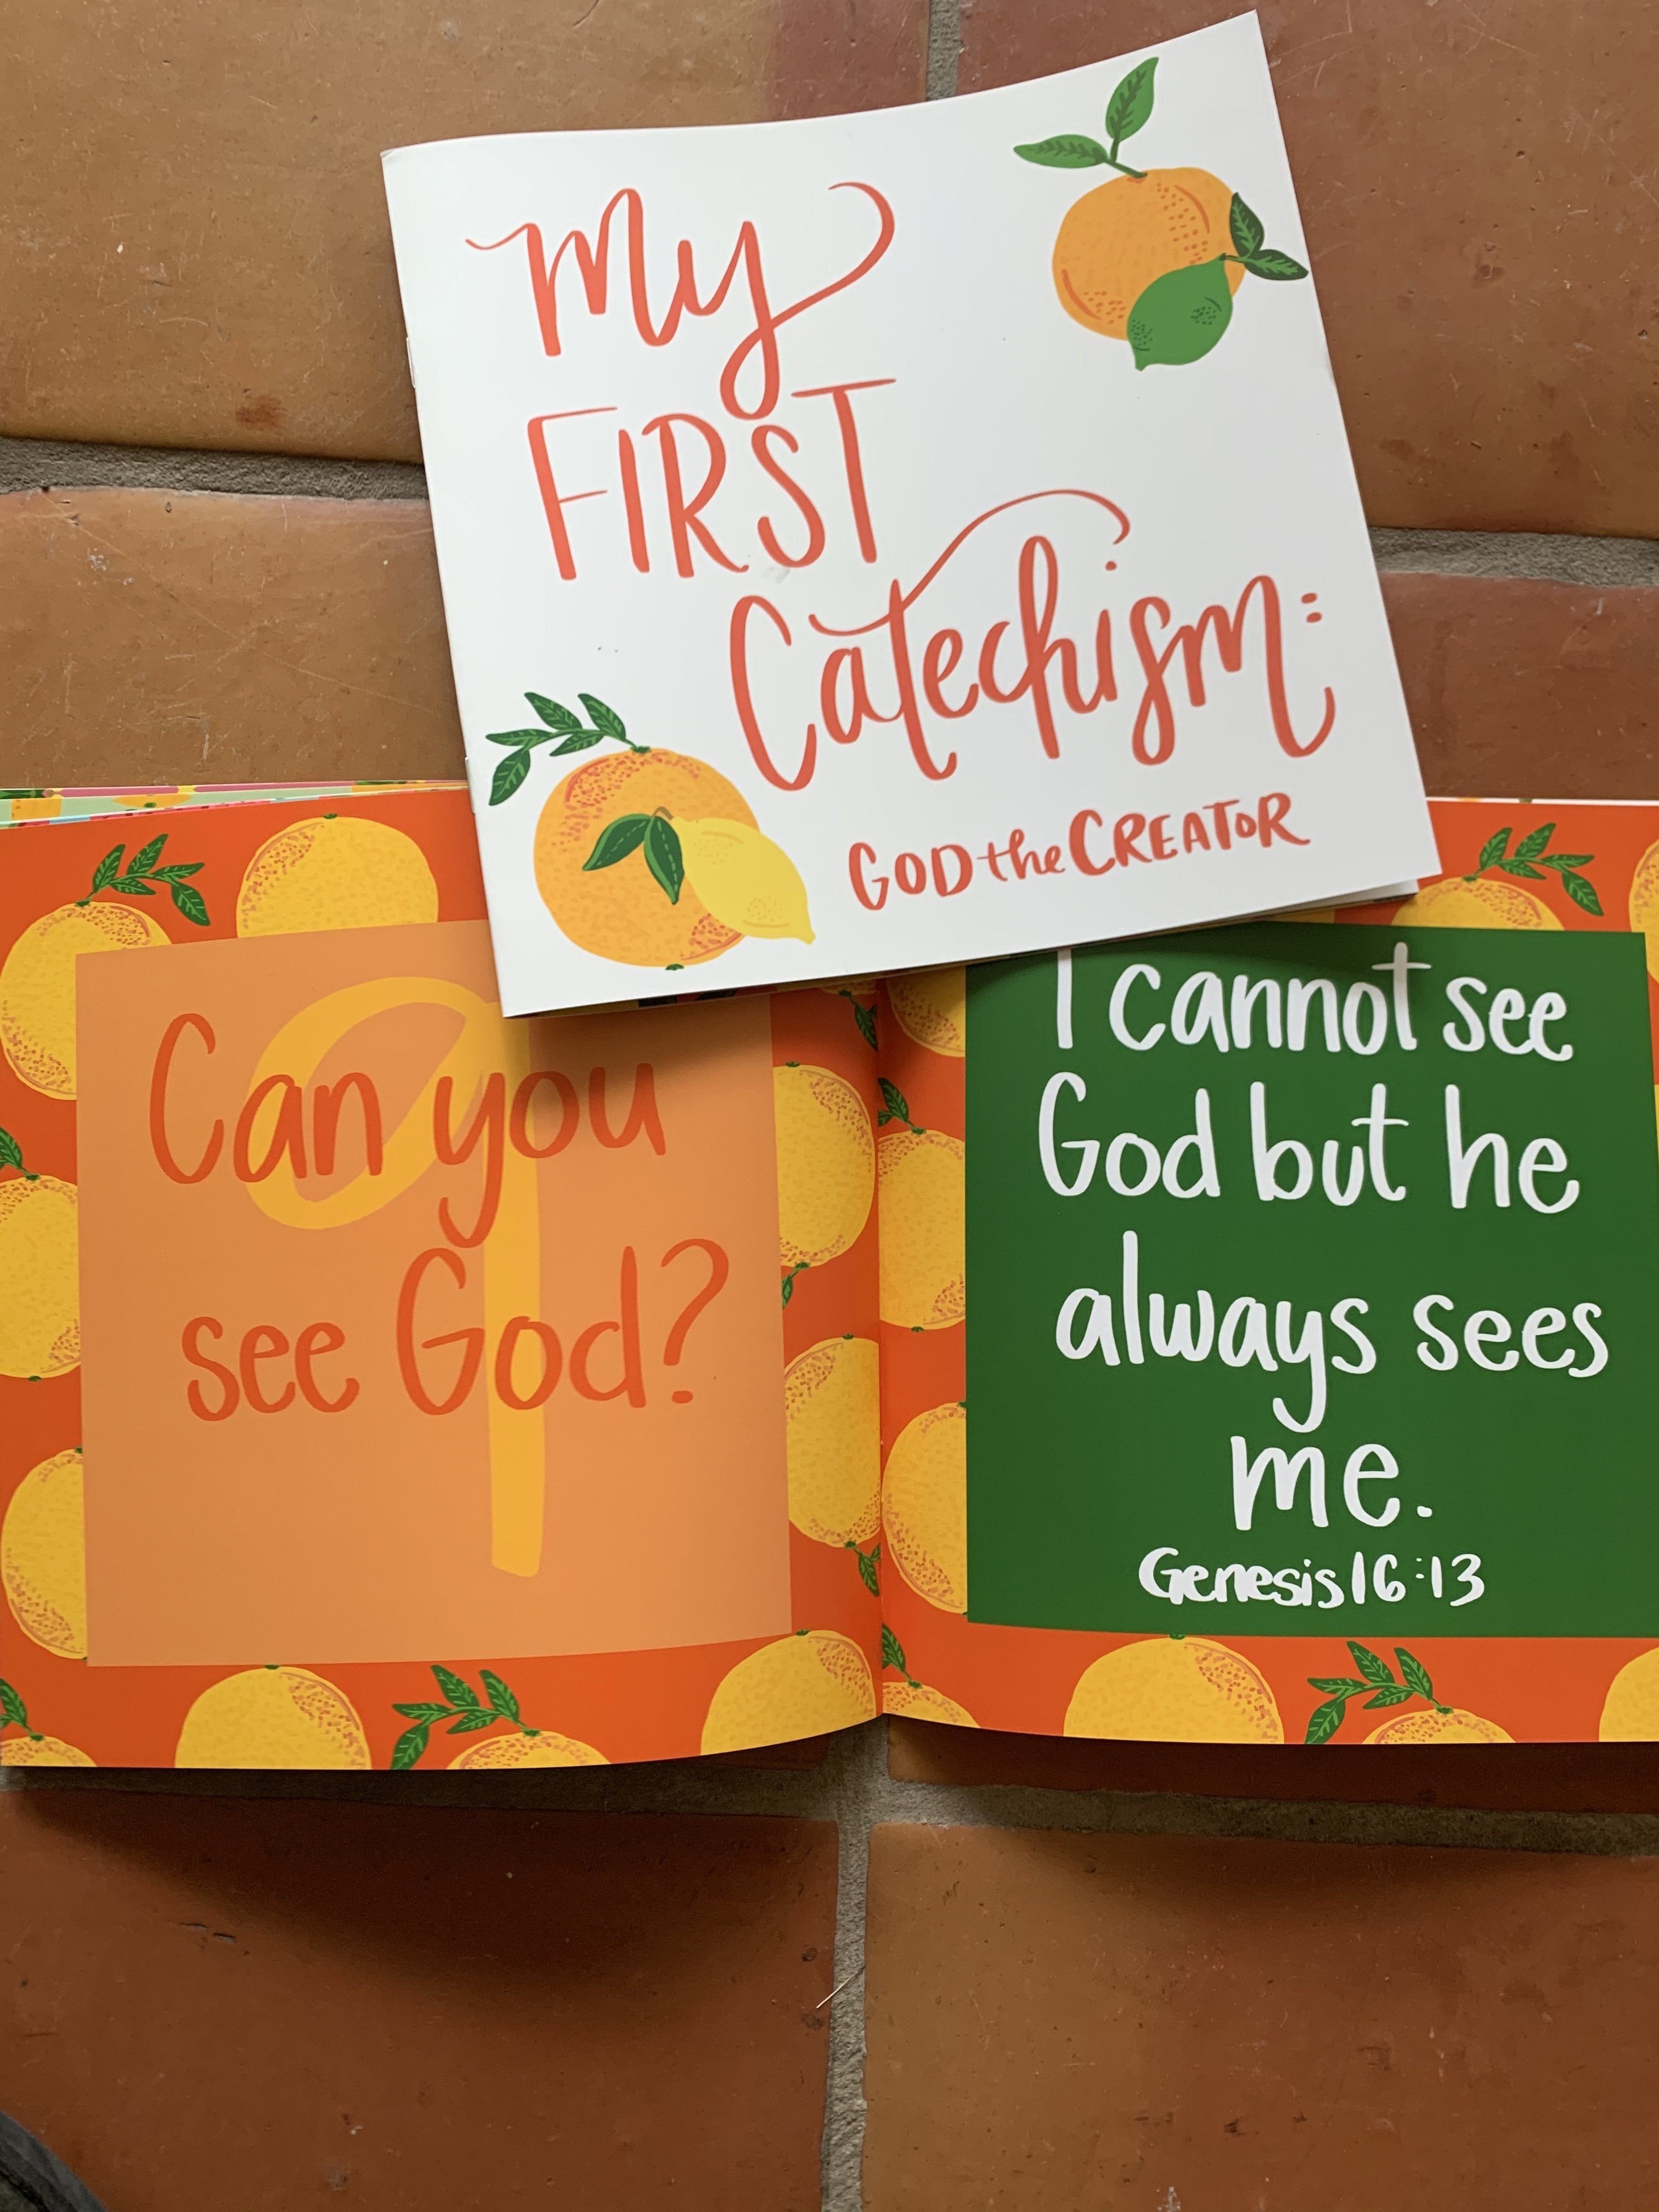 My First Catechism Book